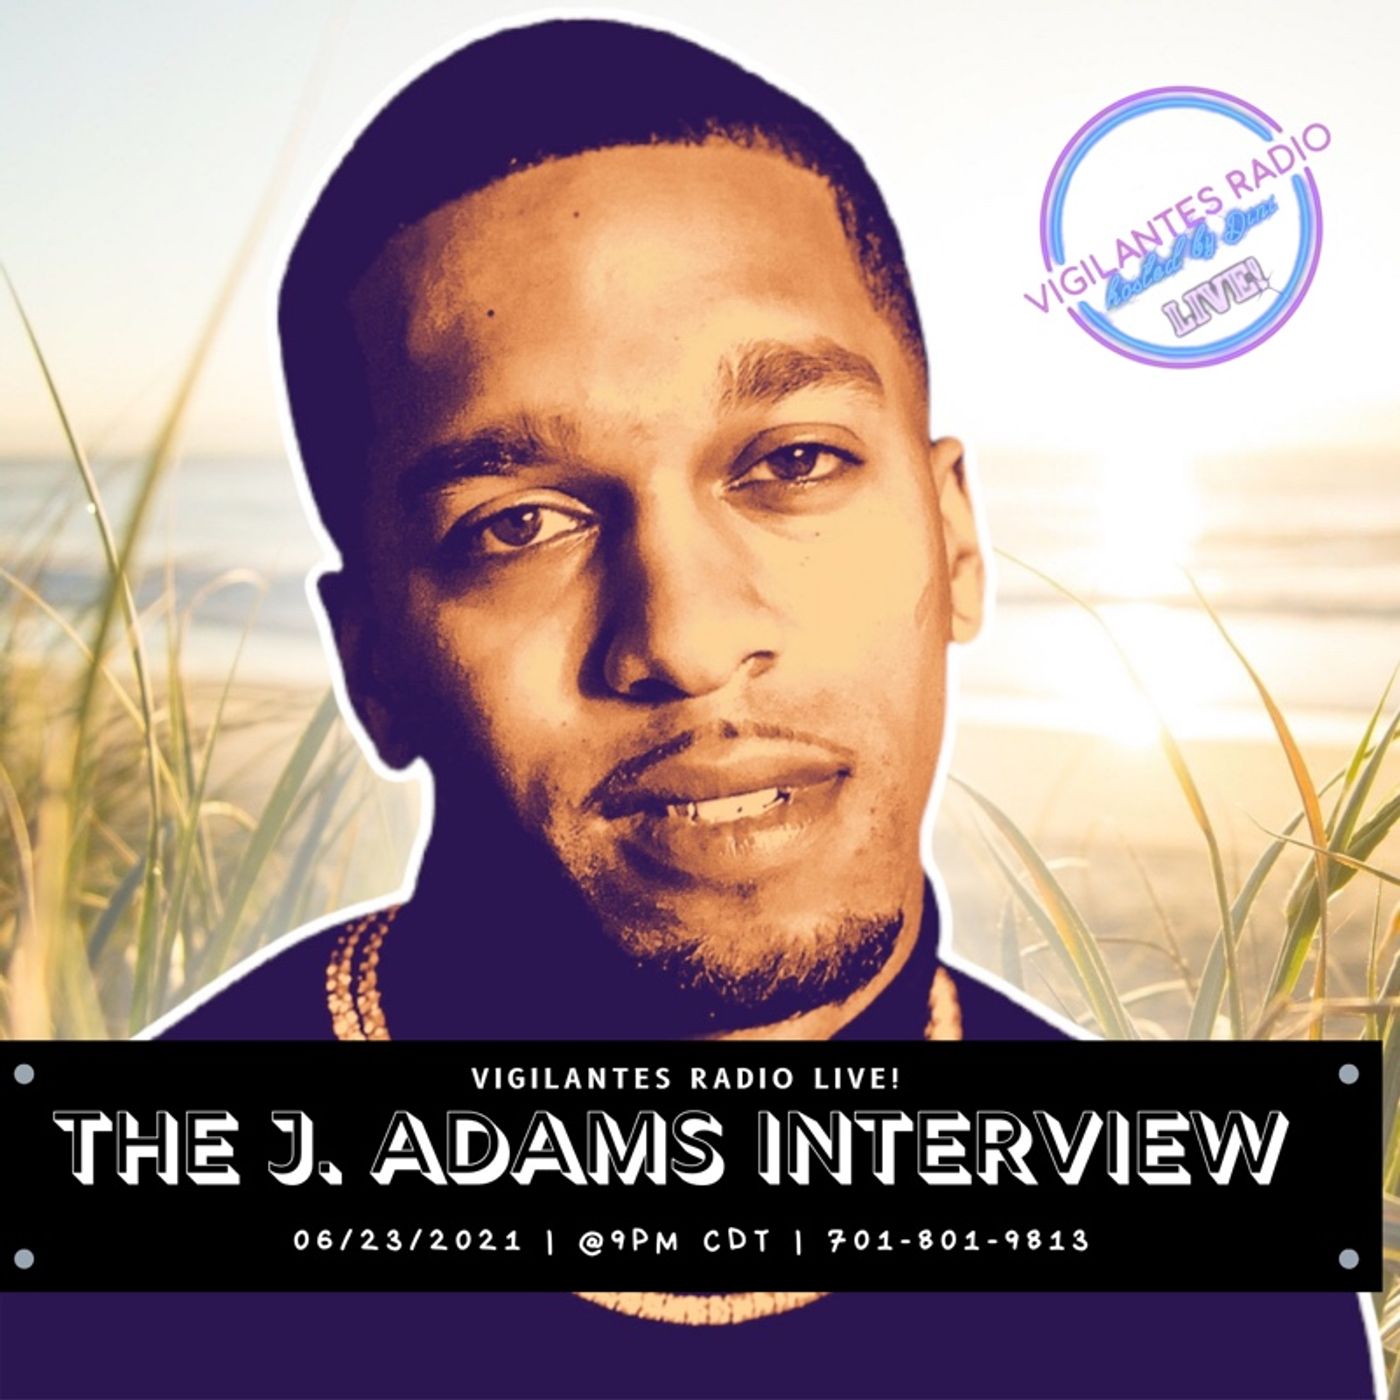 The J. Adams Interview. Image